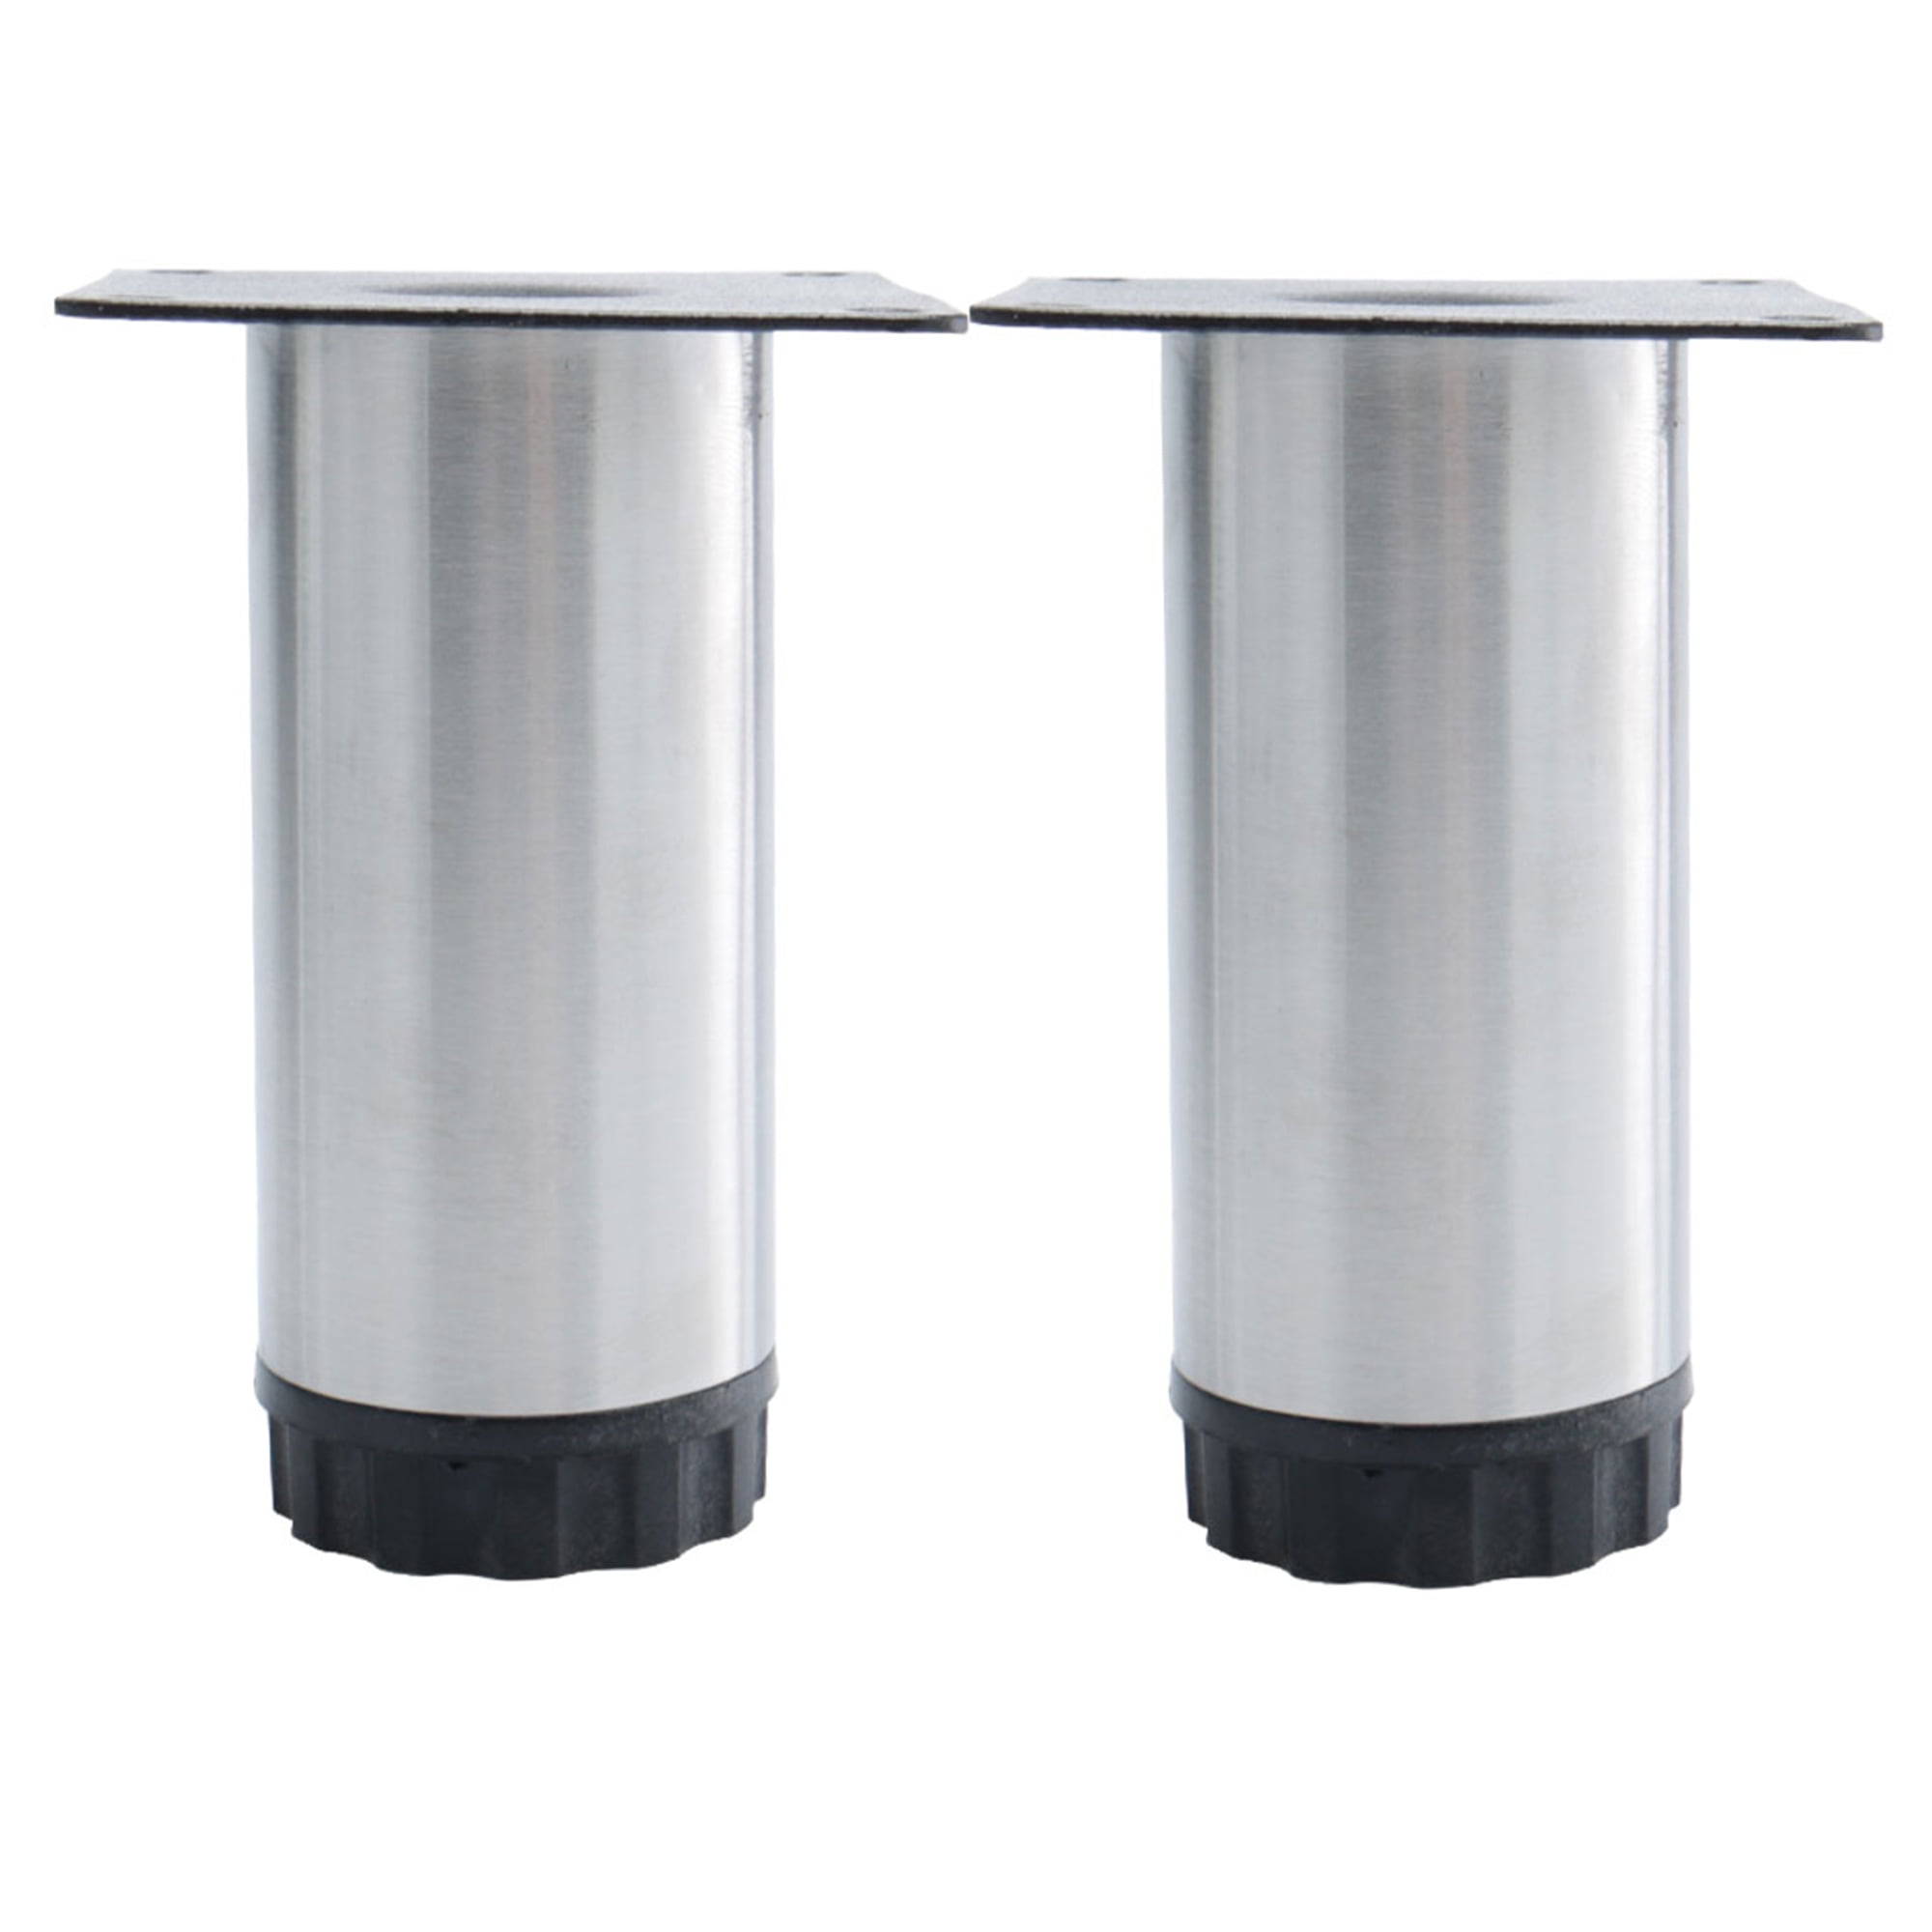 Details about   Stainless Steel Adjustable Furniture Legs Metal Round Sofa Table Cabinet Feet UK 